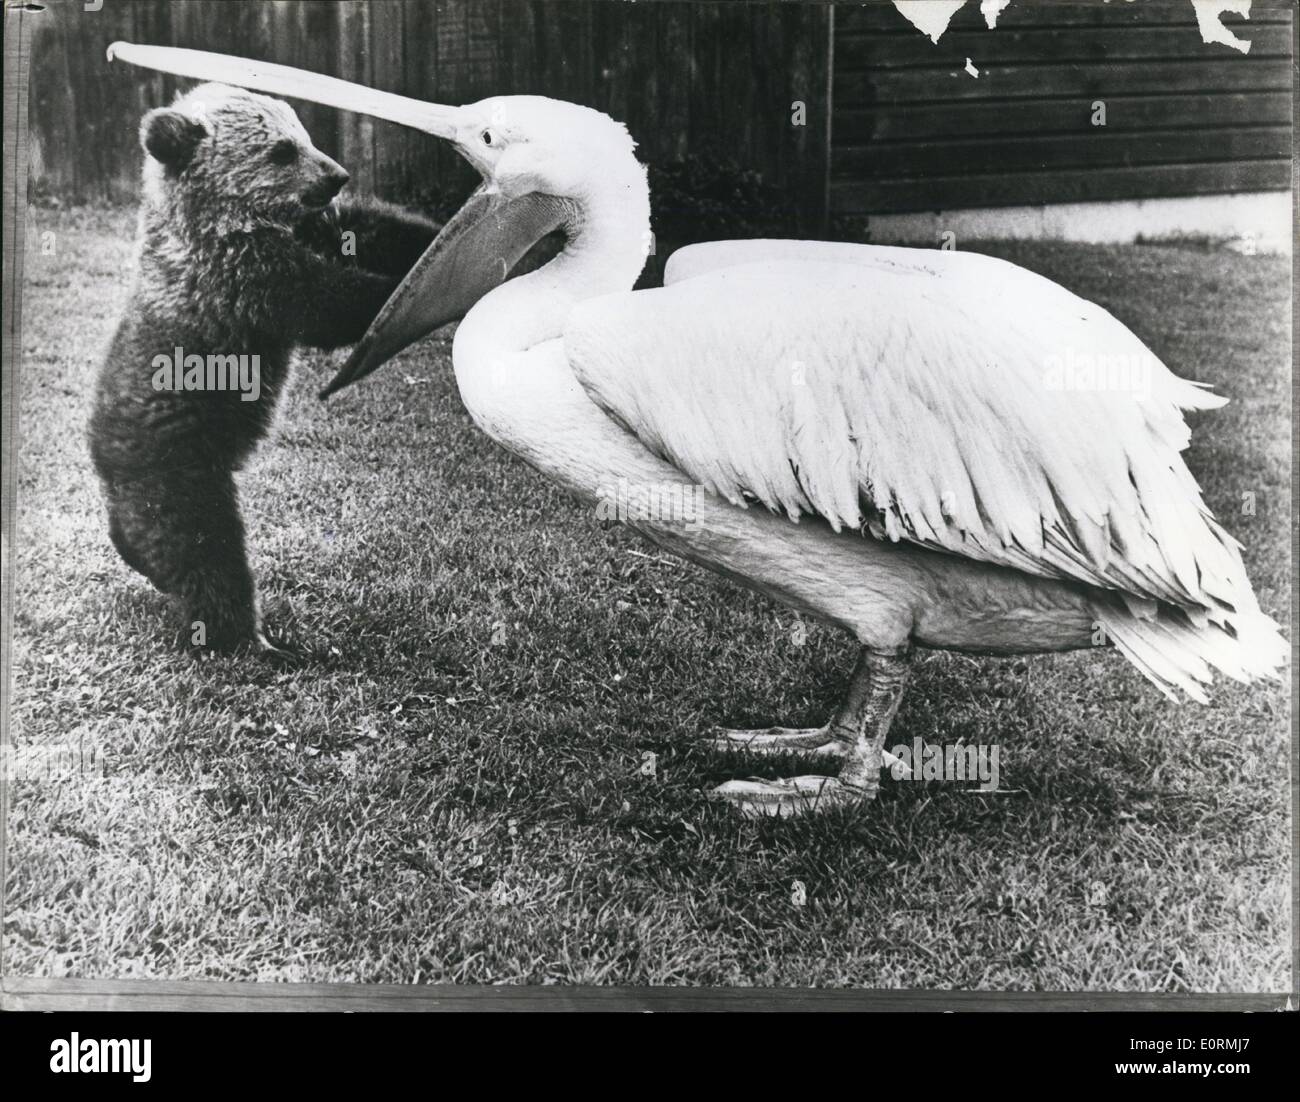 Jan 1, 1960 - No Slouch of Pouch: From the start it was a friendship of mutual convenience: The worrisome little newcomer of a brown near cub, bearing unlikely name of sir Francis Chichester, and the amiably cooperative pelican Percy who after four years of being gawked at in England's Playmouth Zoo, has learned to four years of being gawked at in England's Plymouth Zoo, has learned to accept the curiosity of hist fellow creatures as a fact of life. Since there is a scarcity of pelicans to pal around with in the zoo, Percy doesn't pay much attention to the birds-of-a-feather rule Stock Photo